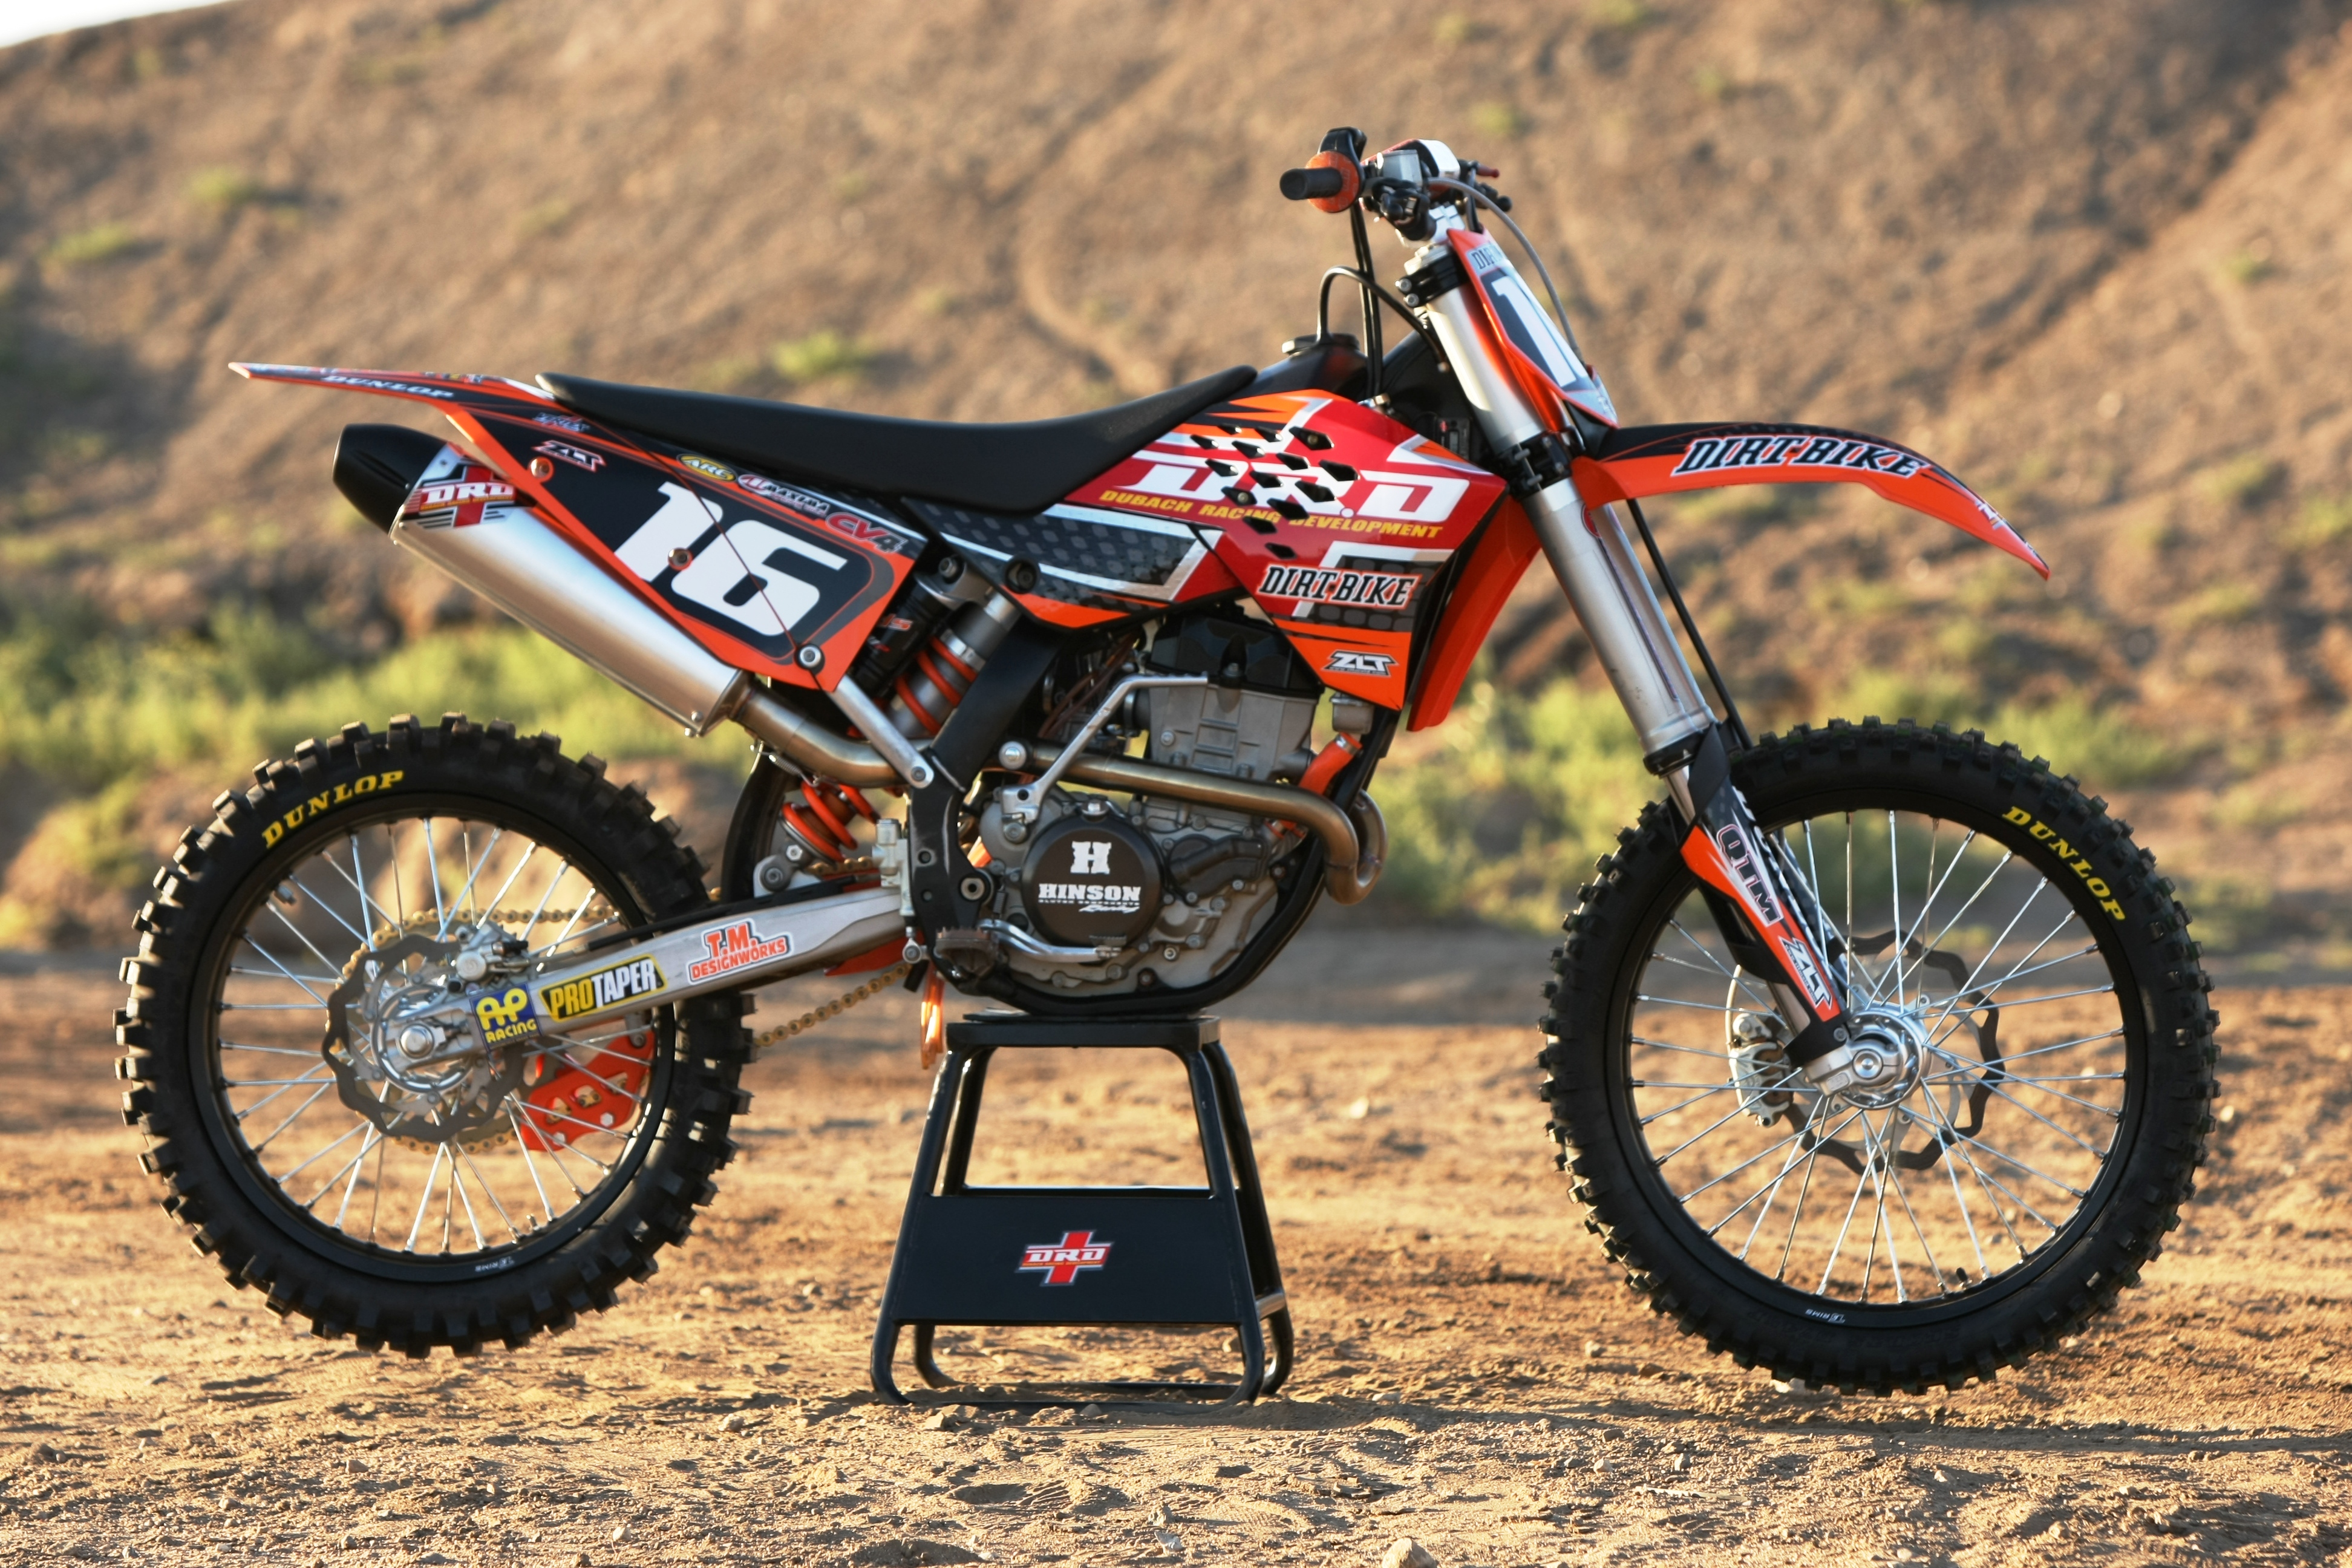 images about motocross bike